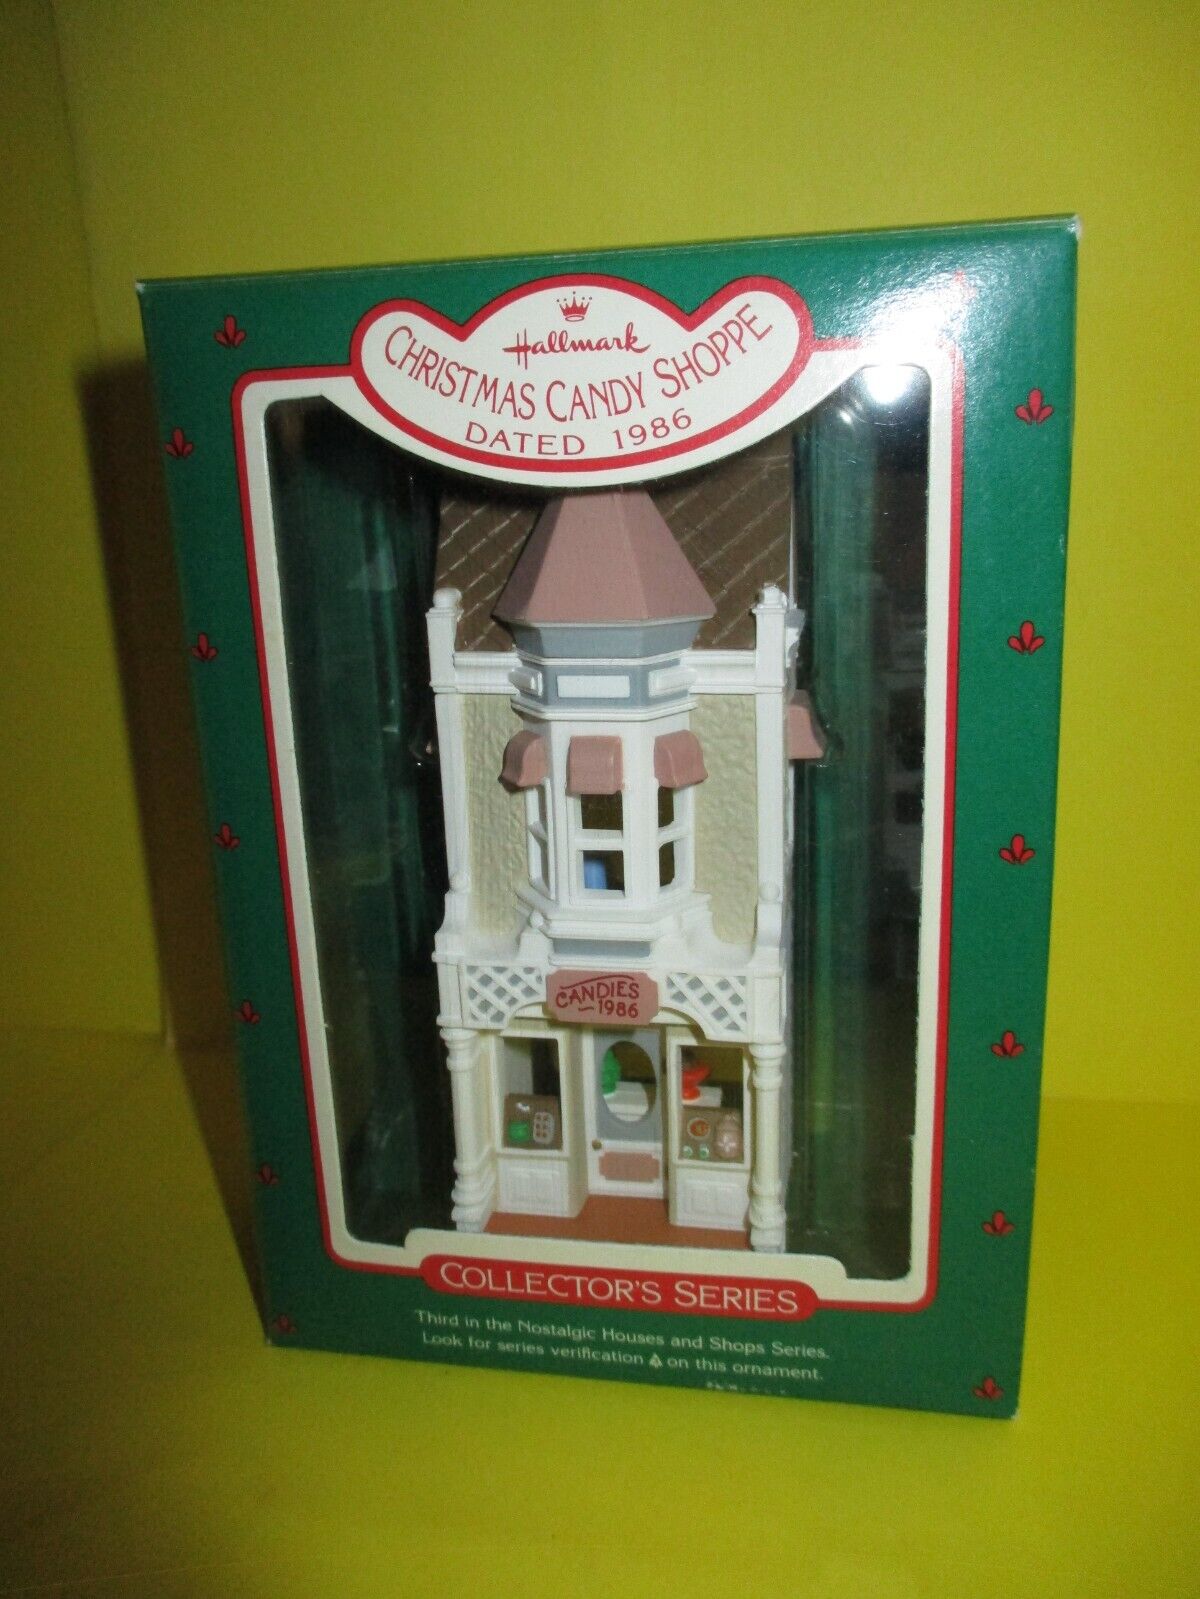 1986 Christmas Candy Shoppe 3rd Nostalgic Houses and Shops SDB w/ Price Tab